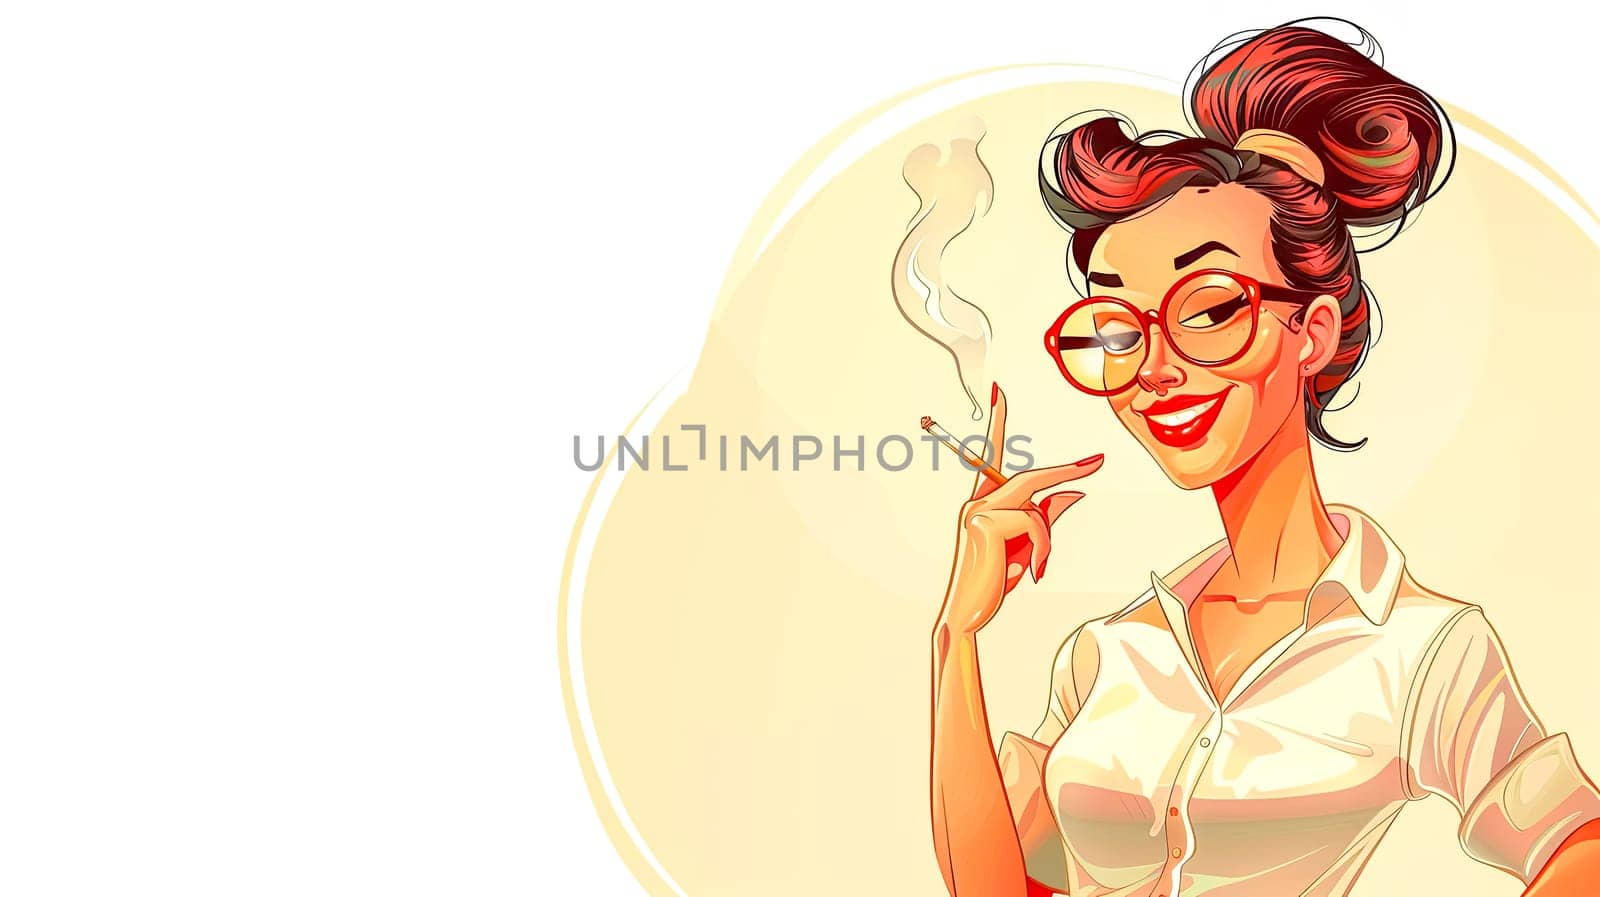 Retro Styled Woman with Glasses Smoking Illustration by Edophoto